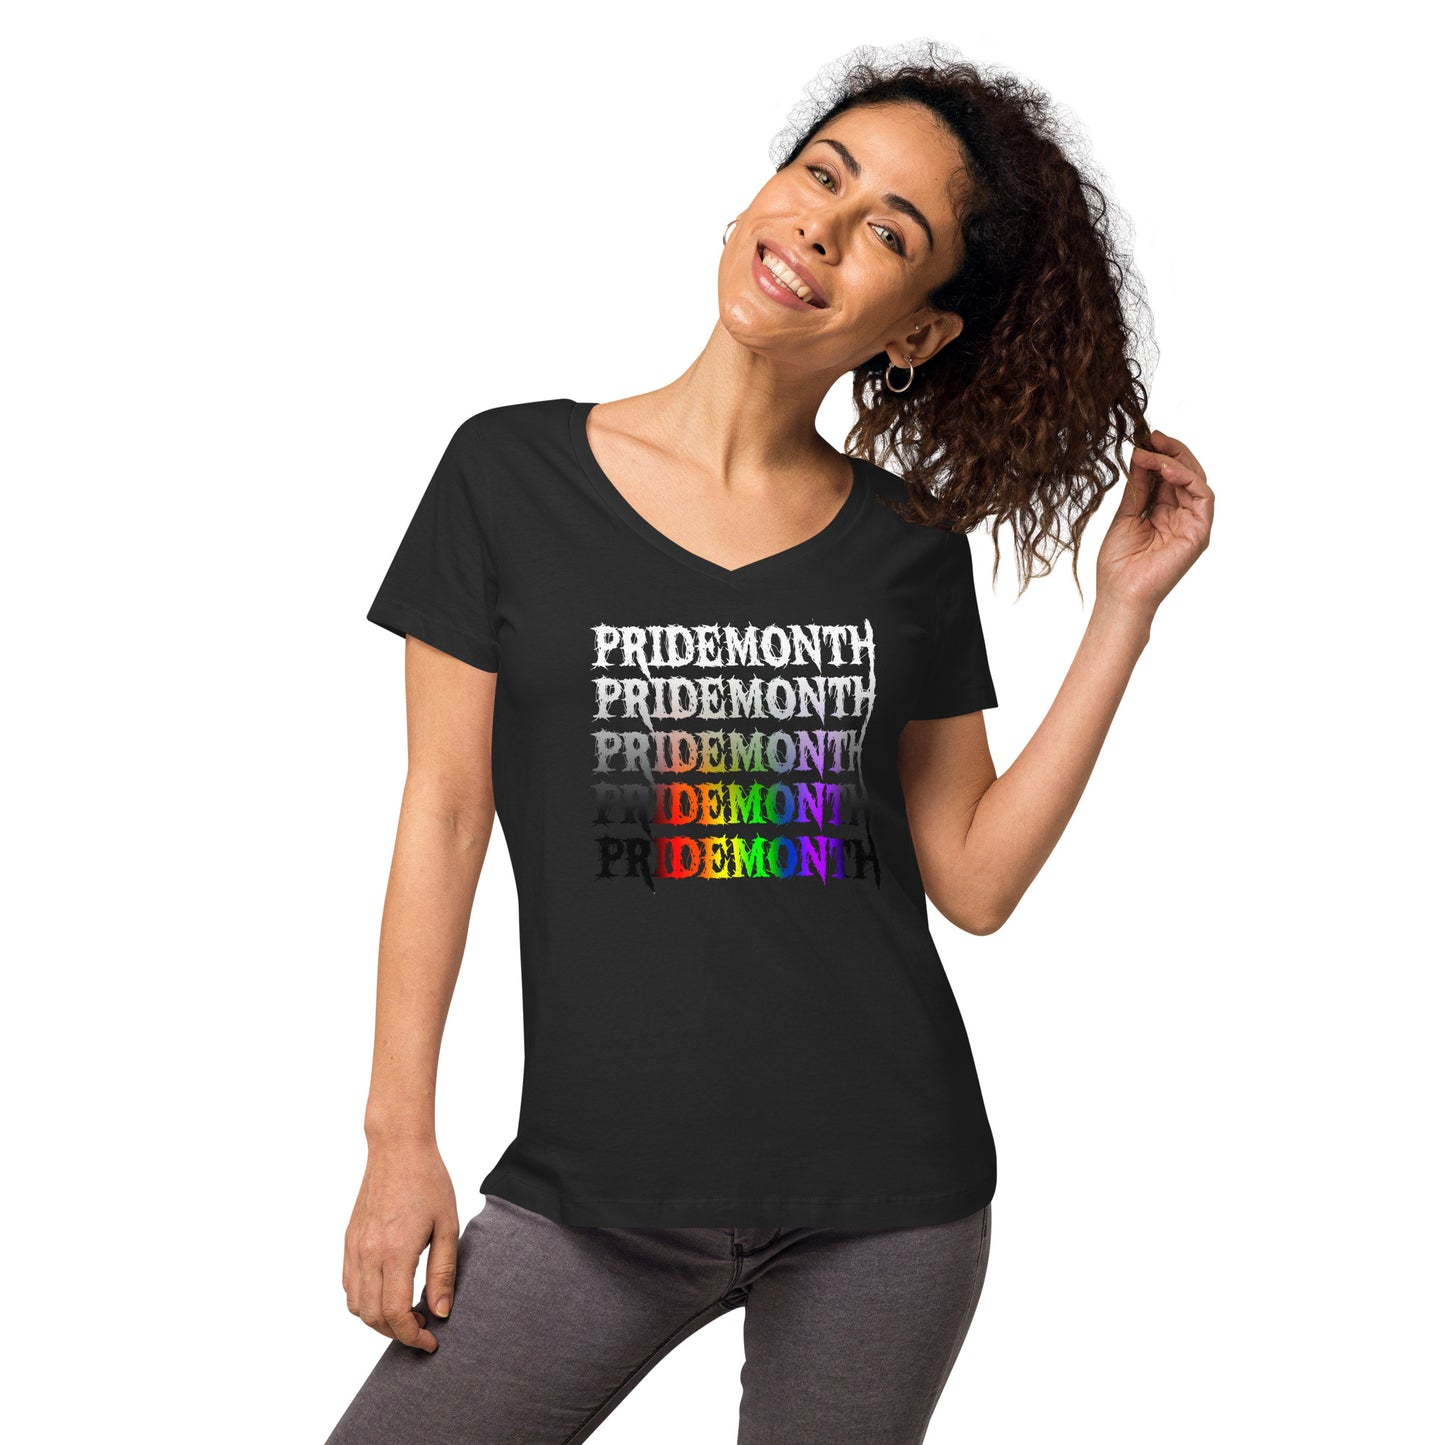 Pride Month Demon - Women’s fitted v-neck t-shirt